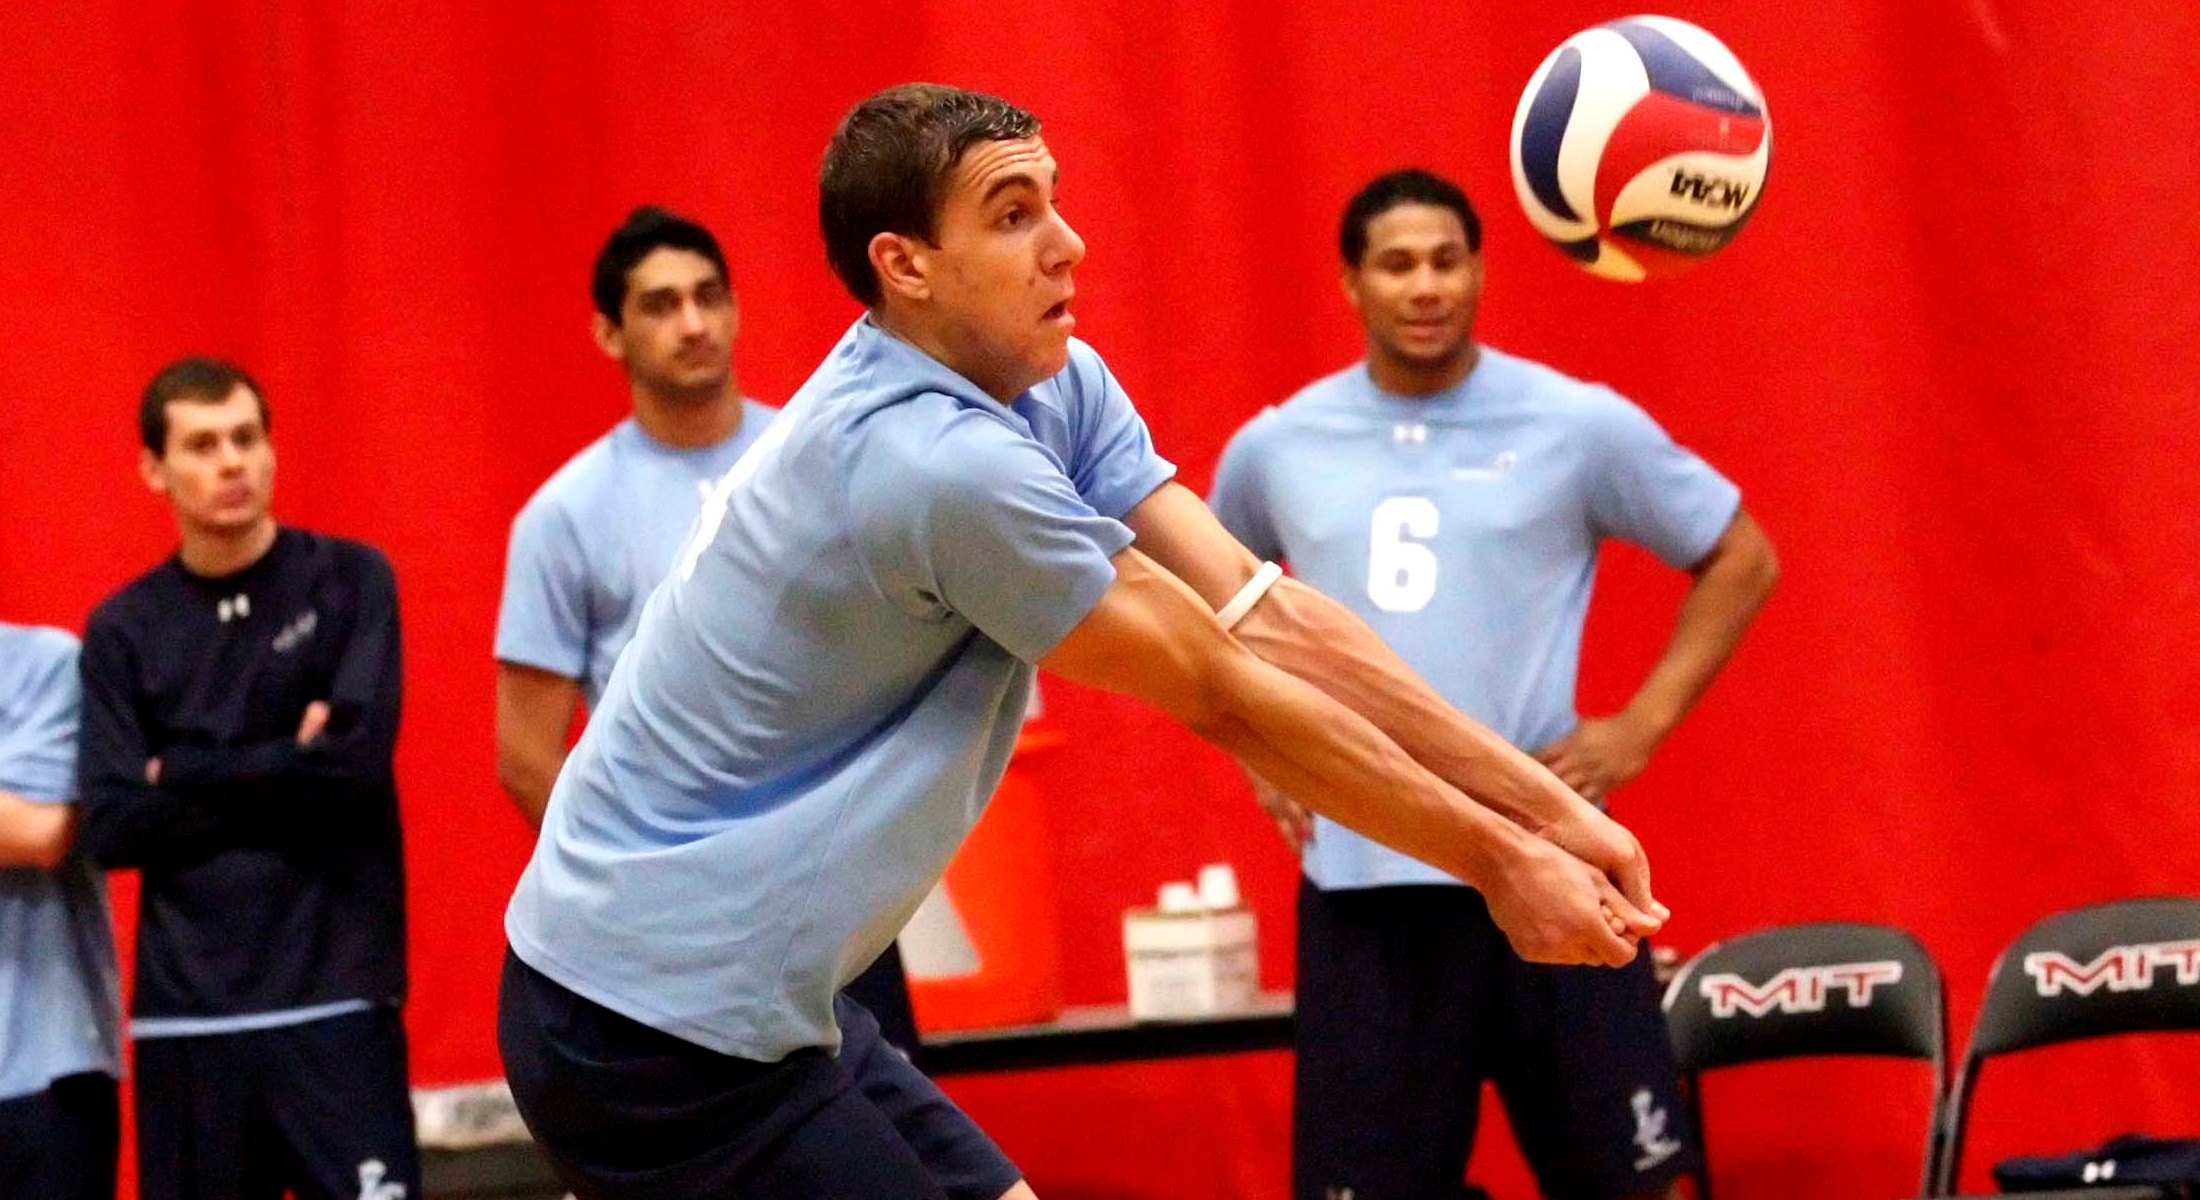 Men's Volleyball Nipped in GNAC Quarterfinals